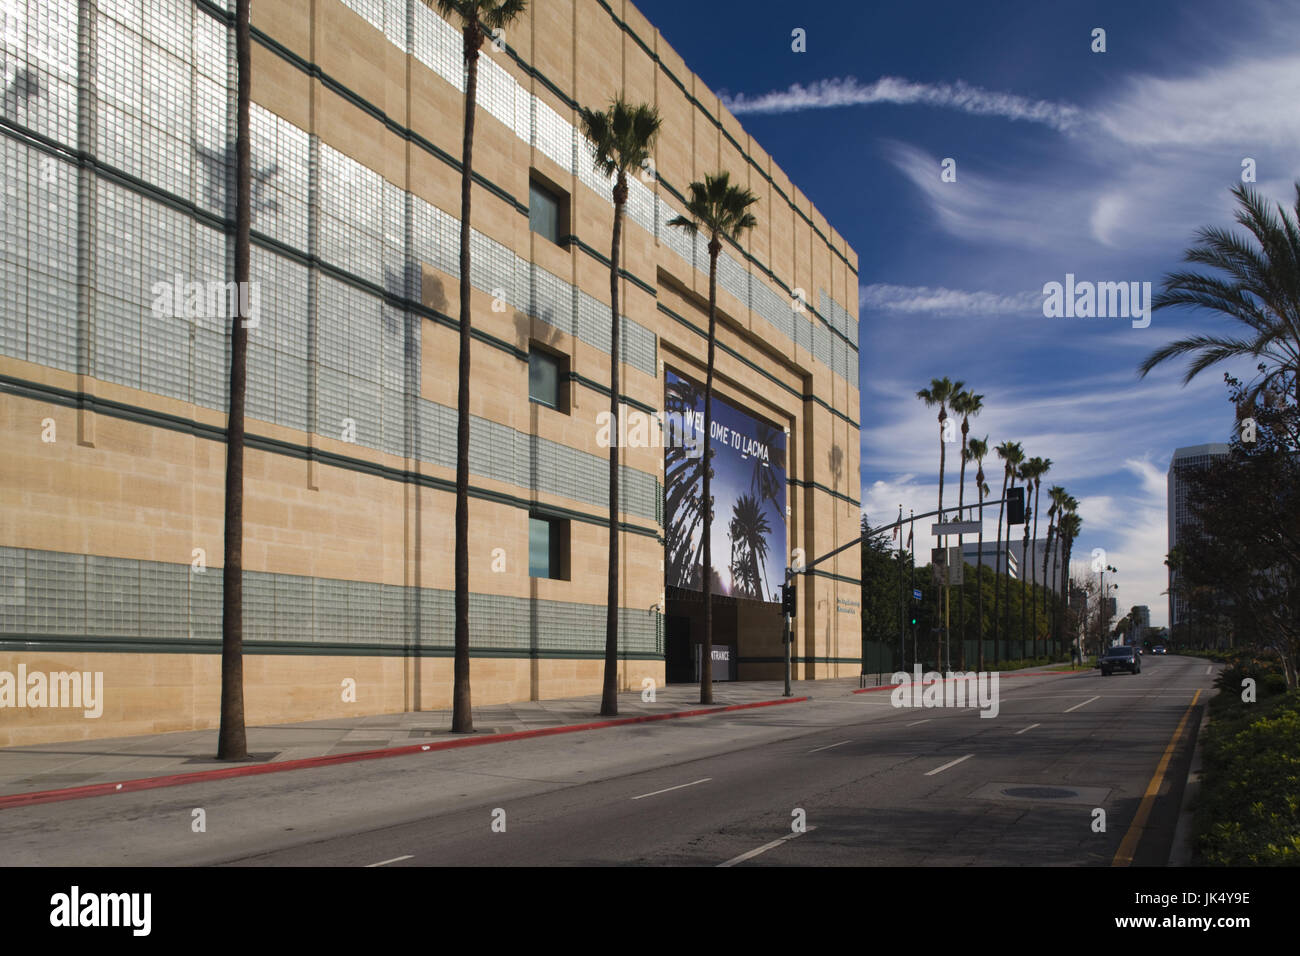 USA, California, Los Angeles, Miracle Mile District, Los Angeles County Museum of Art, LACMA Stock Photo